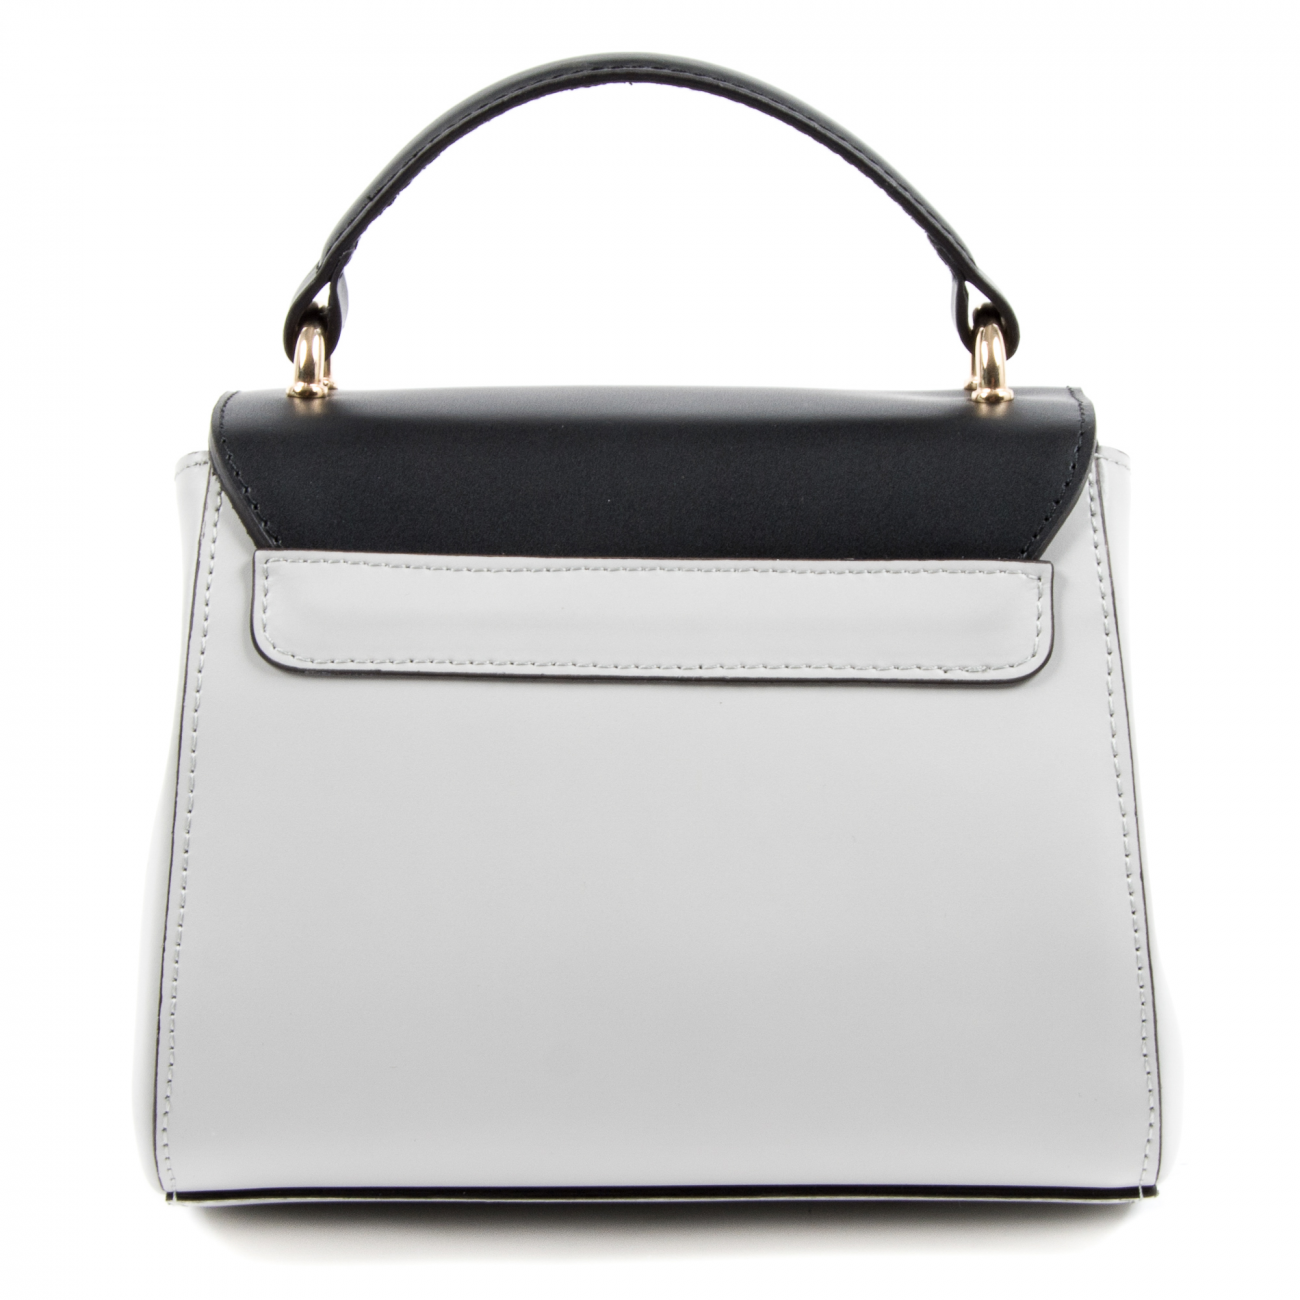 Details: N862M POLVERE NERO - Color: Grey - Composition: 100% LEATHER - Measures (Width-Height-Depth): 18x14x8 cm - Made: ITALY - Front Logo - Botton Closure - Logo Inside - Removable Shoulder Strap